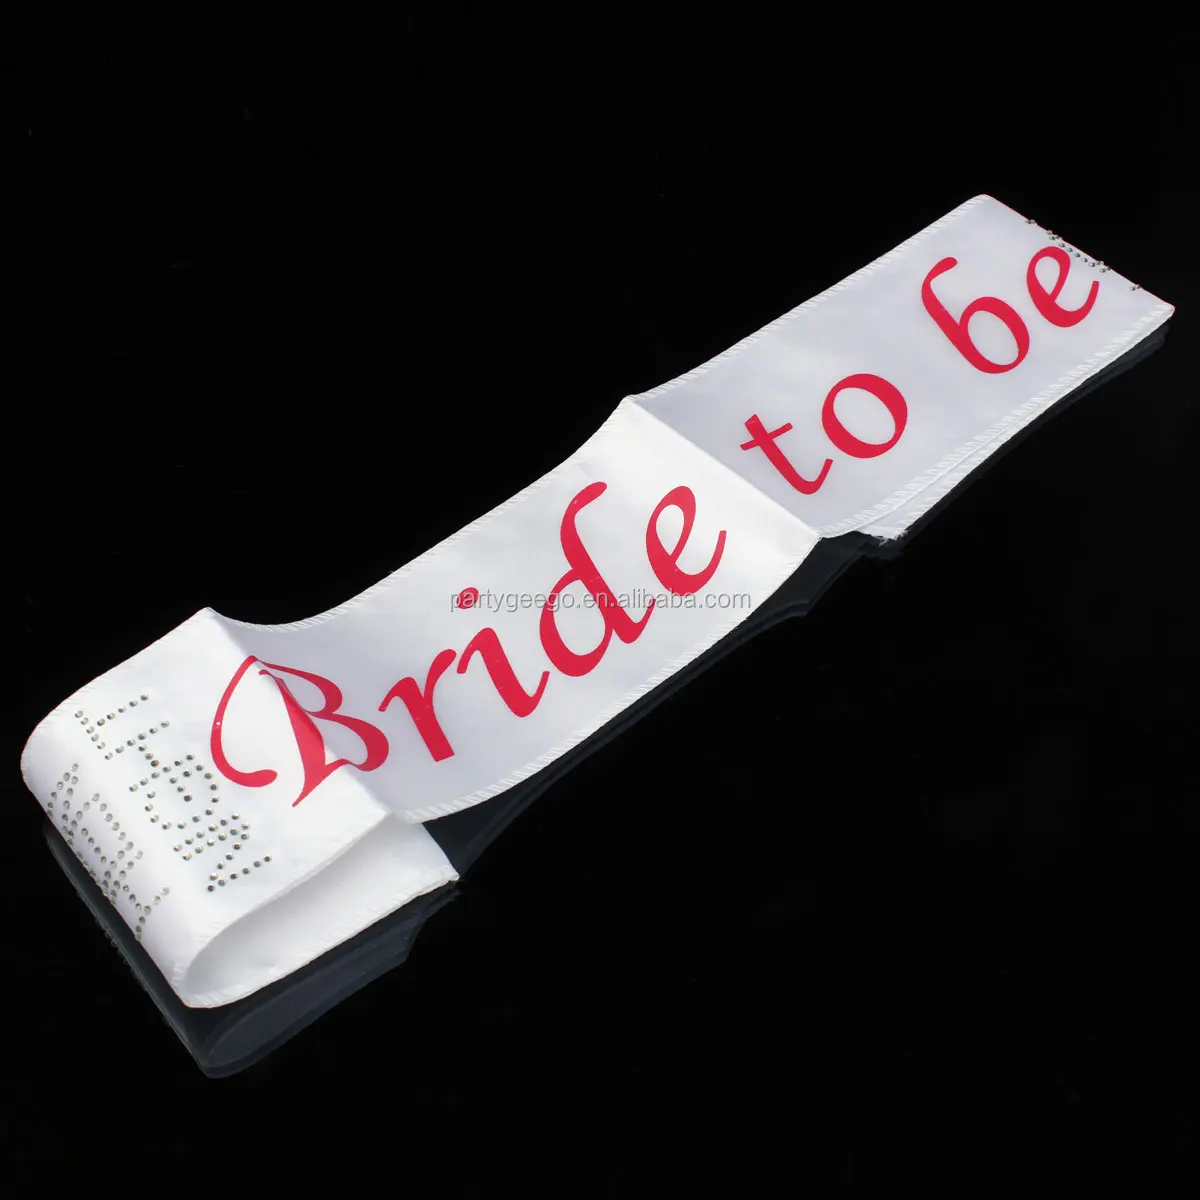 
bachelorette hen party bride to be veil for wedding party Sash Set 